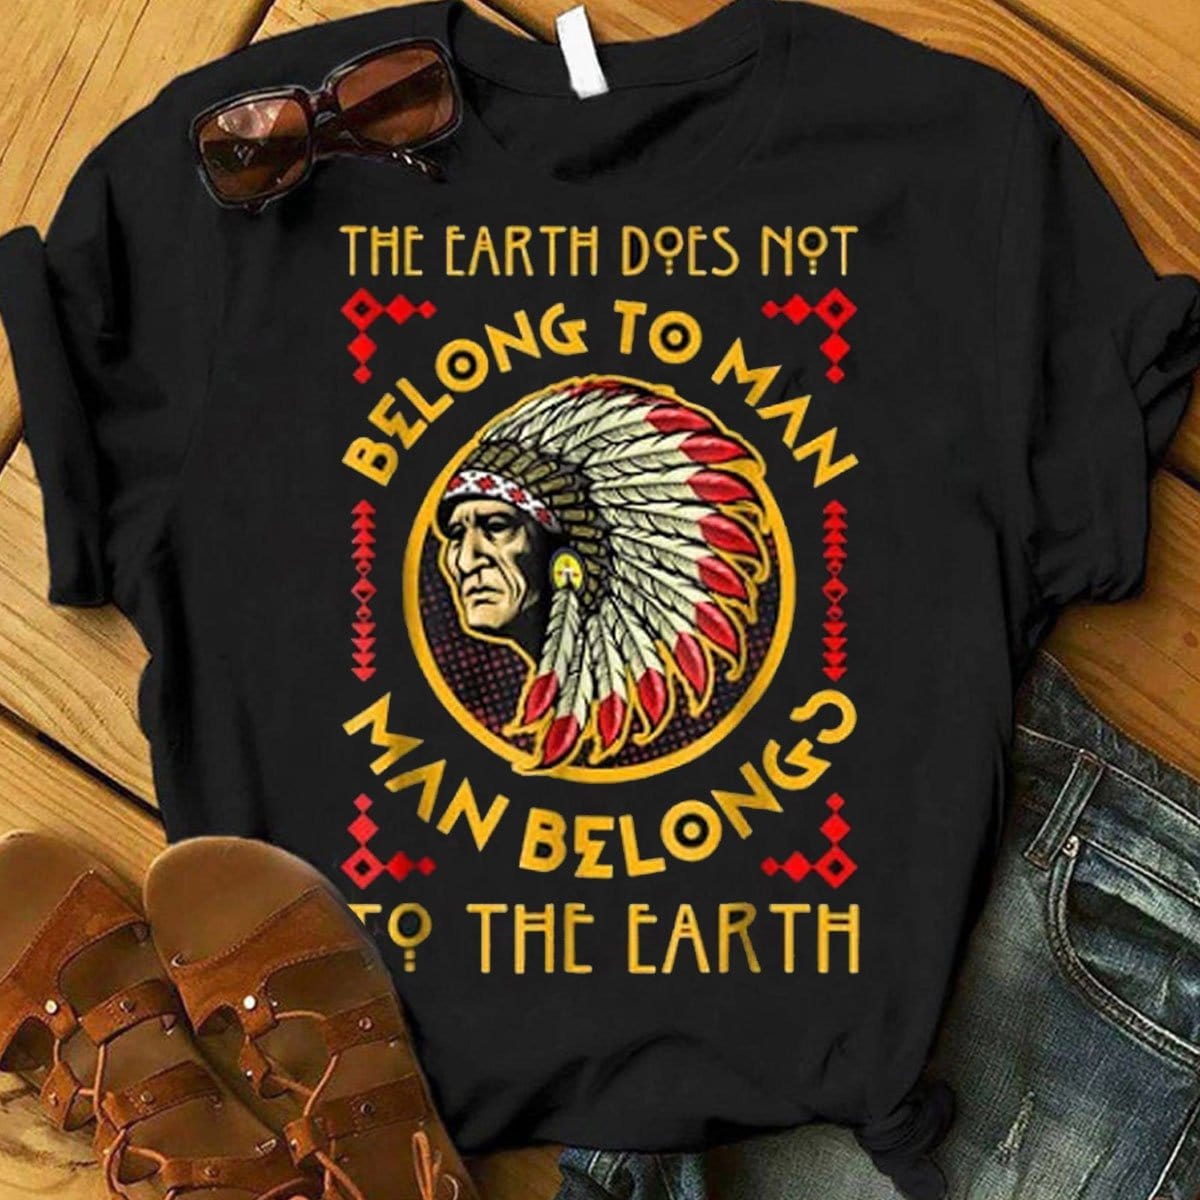 The Earth Doesn't Belong To Man, Native American Shirts